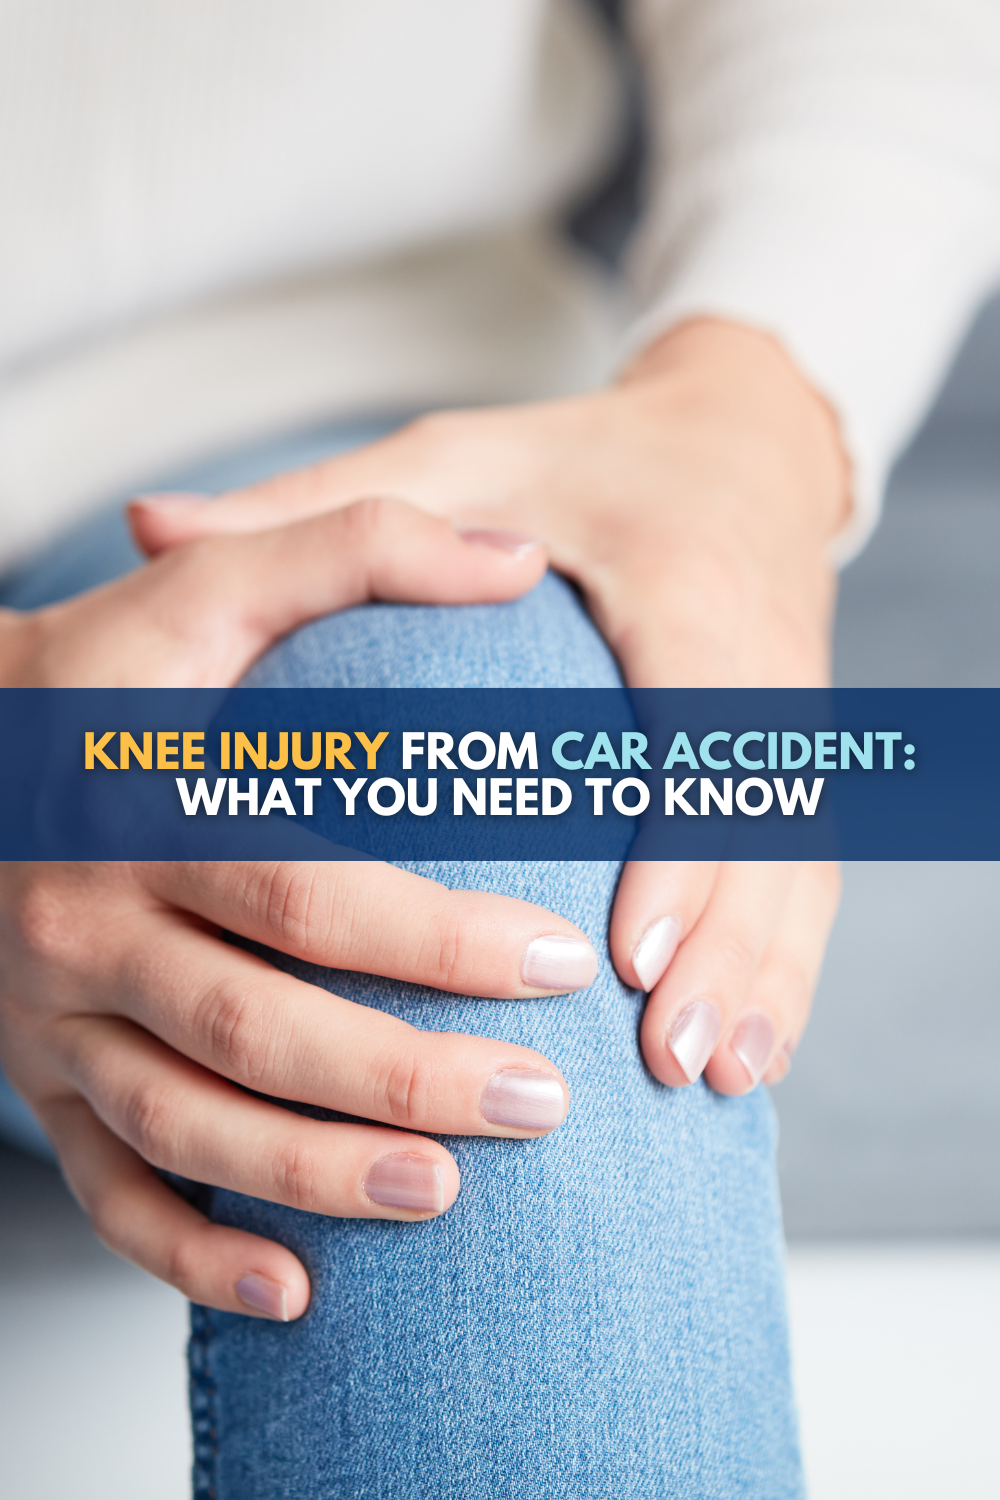 https://www.michiganautolaw.com/wp-content/uploads/2023/07/MAL-Knee-Injury-from-Car-Accident-1000-%C3%97-1500-px.png